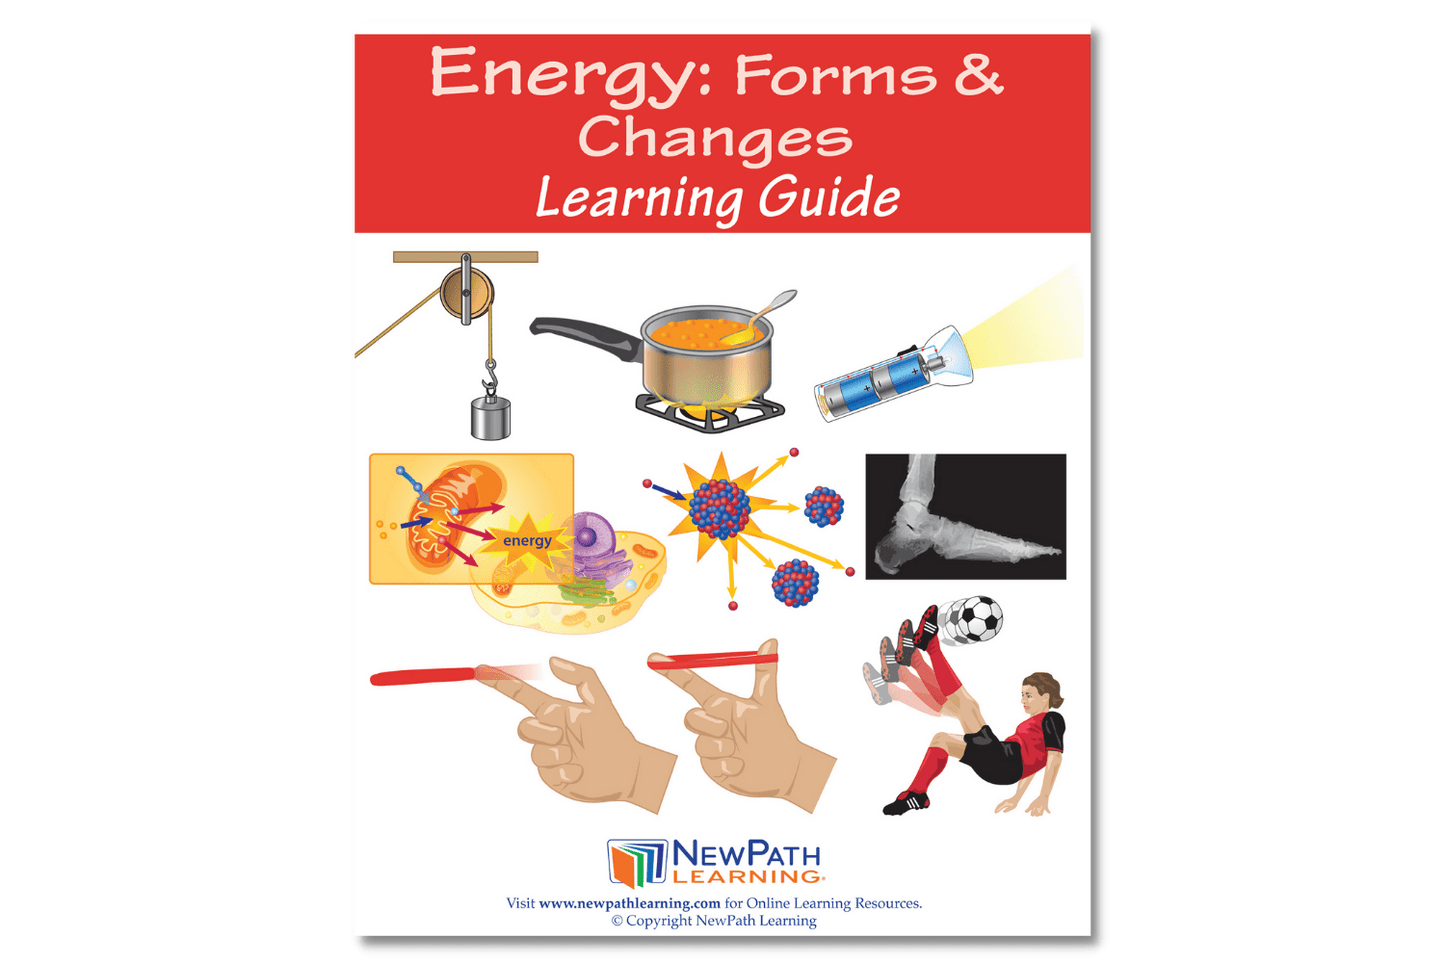 Arbor Scientific Energy: Forms & Changes Learning Guide